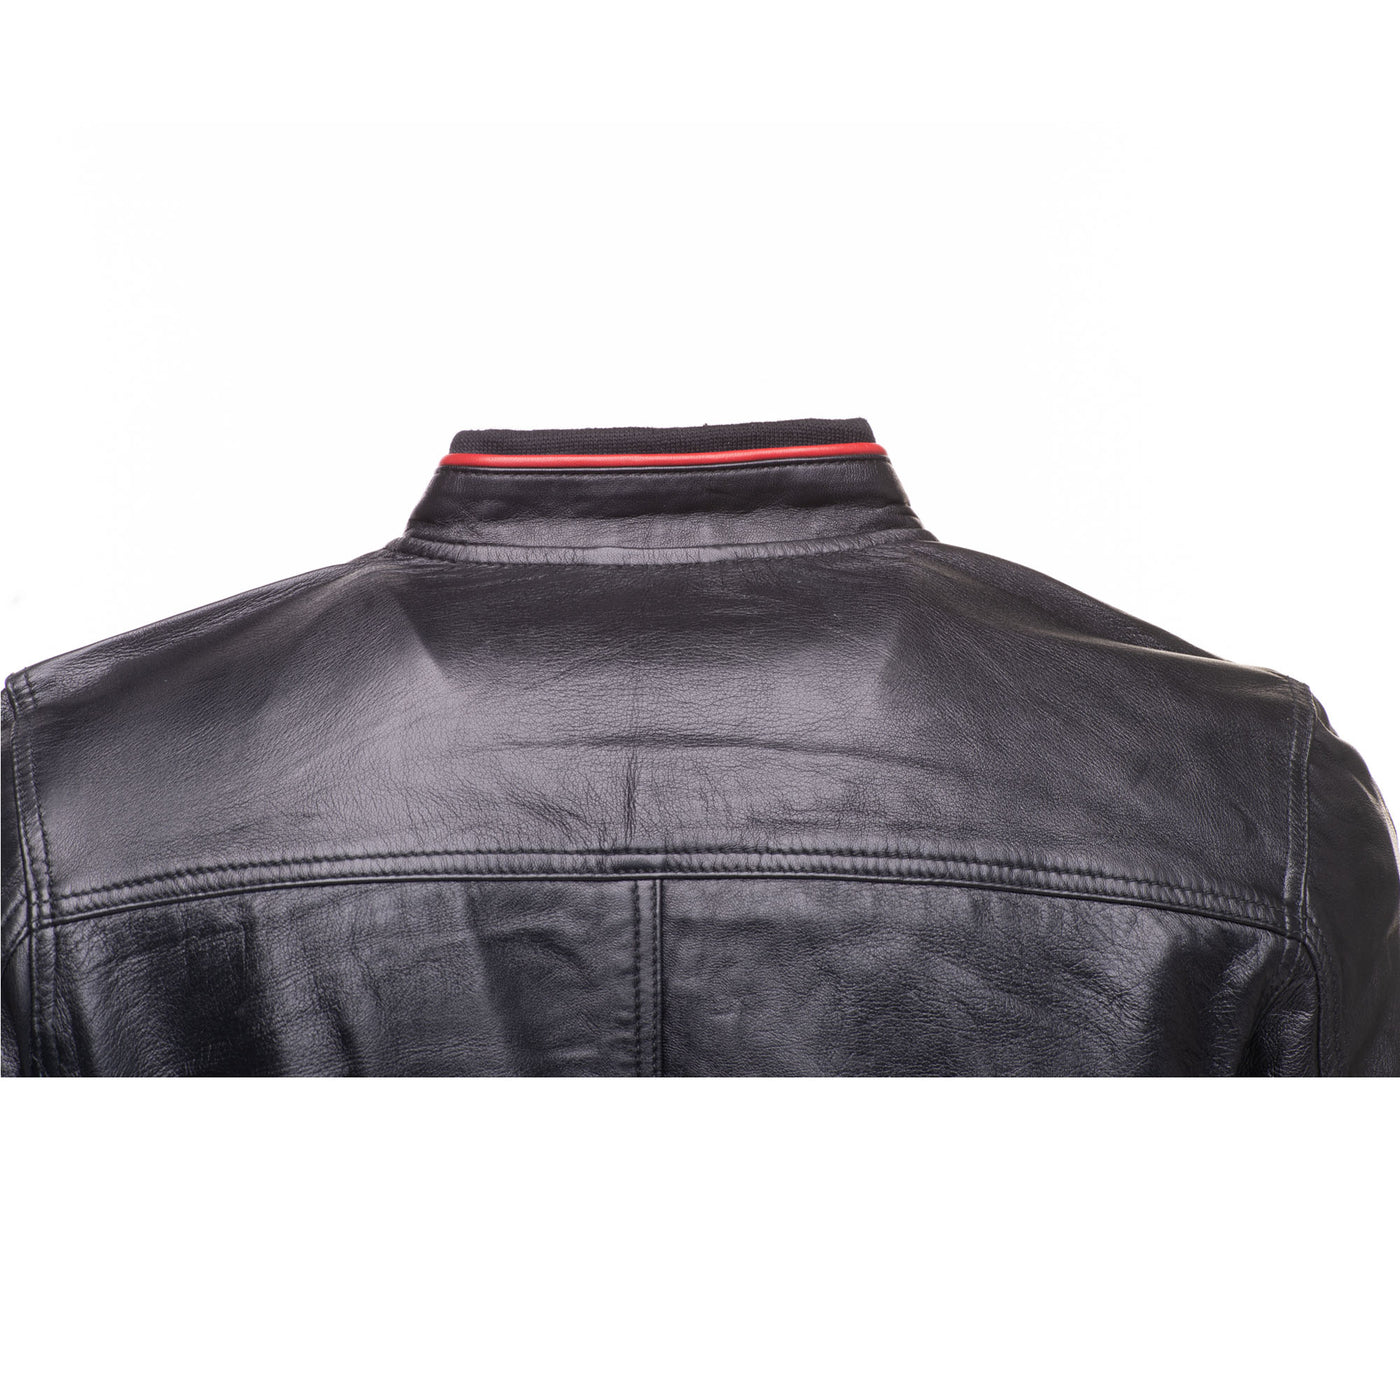 William black bomber leather jacket with red piping